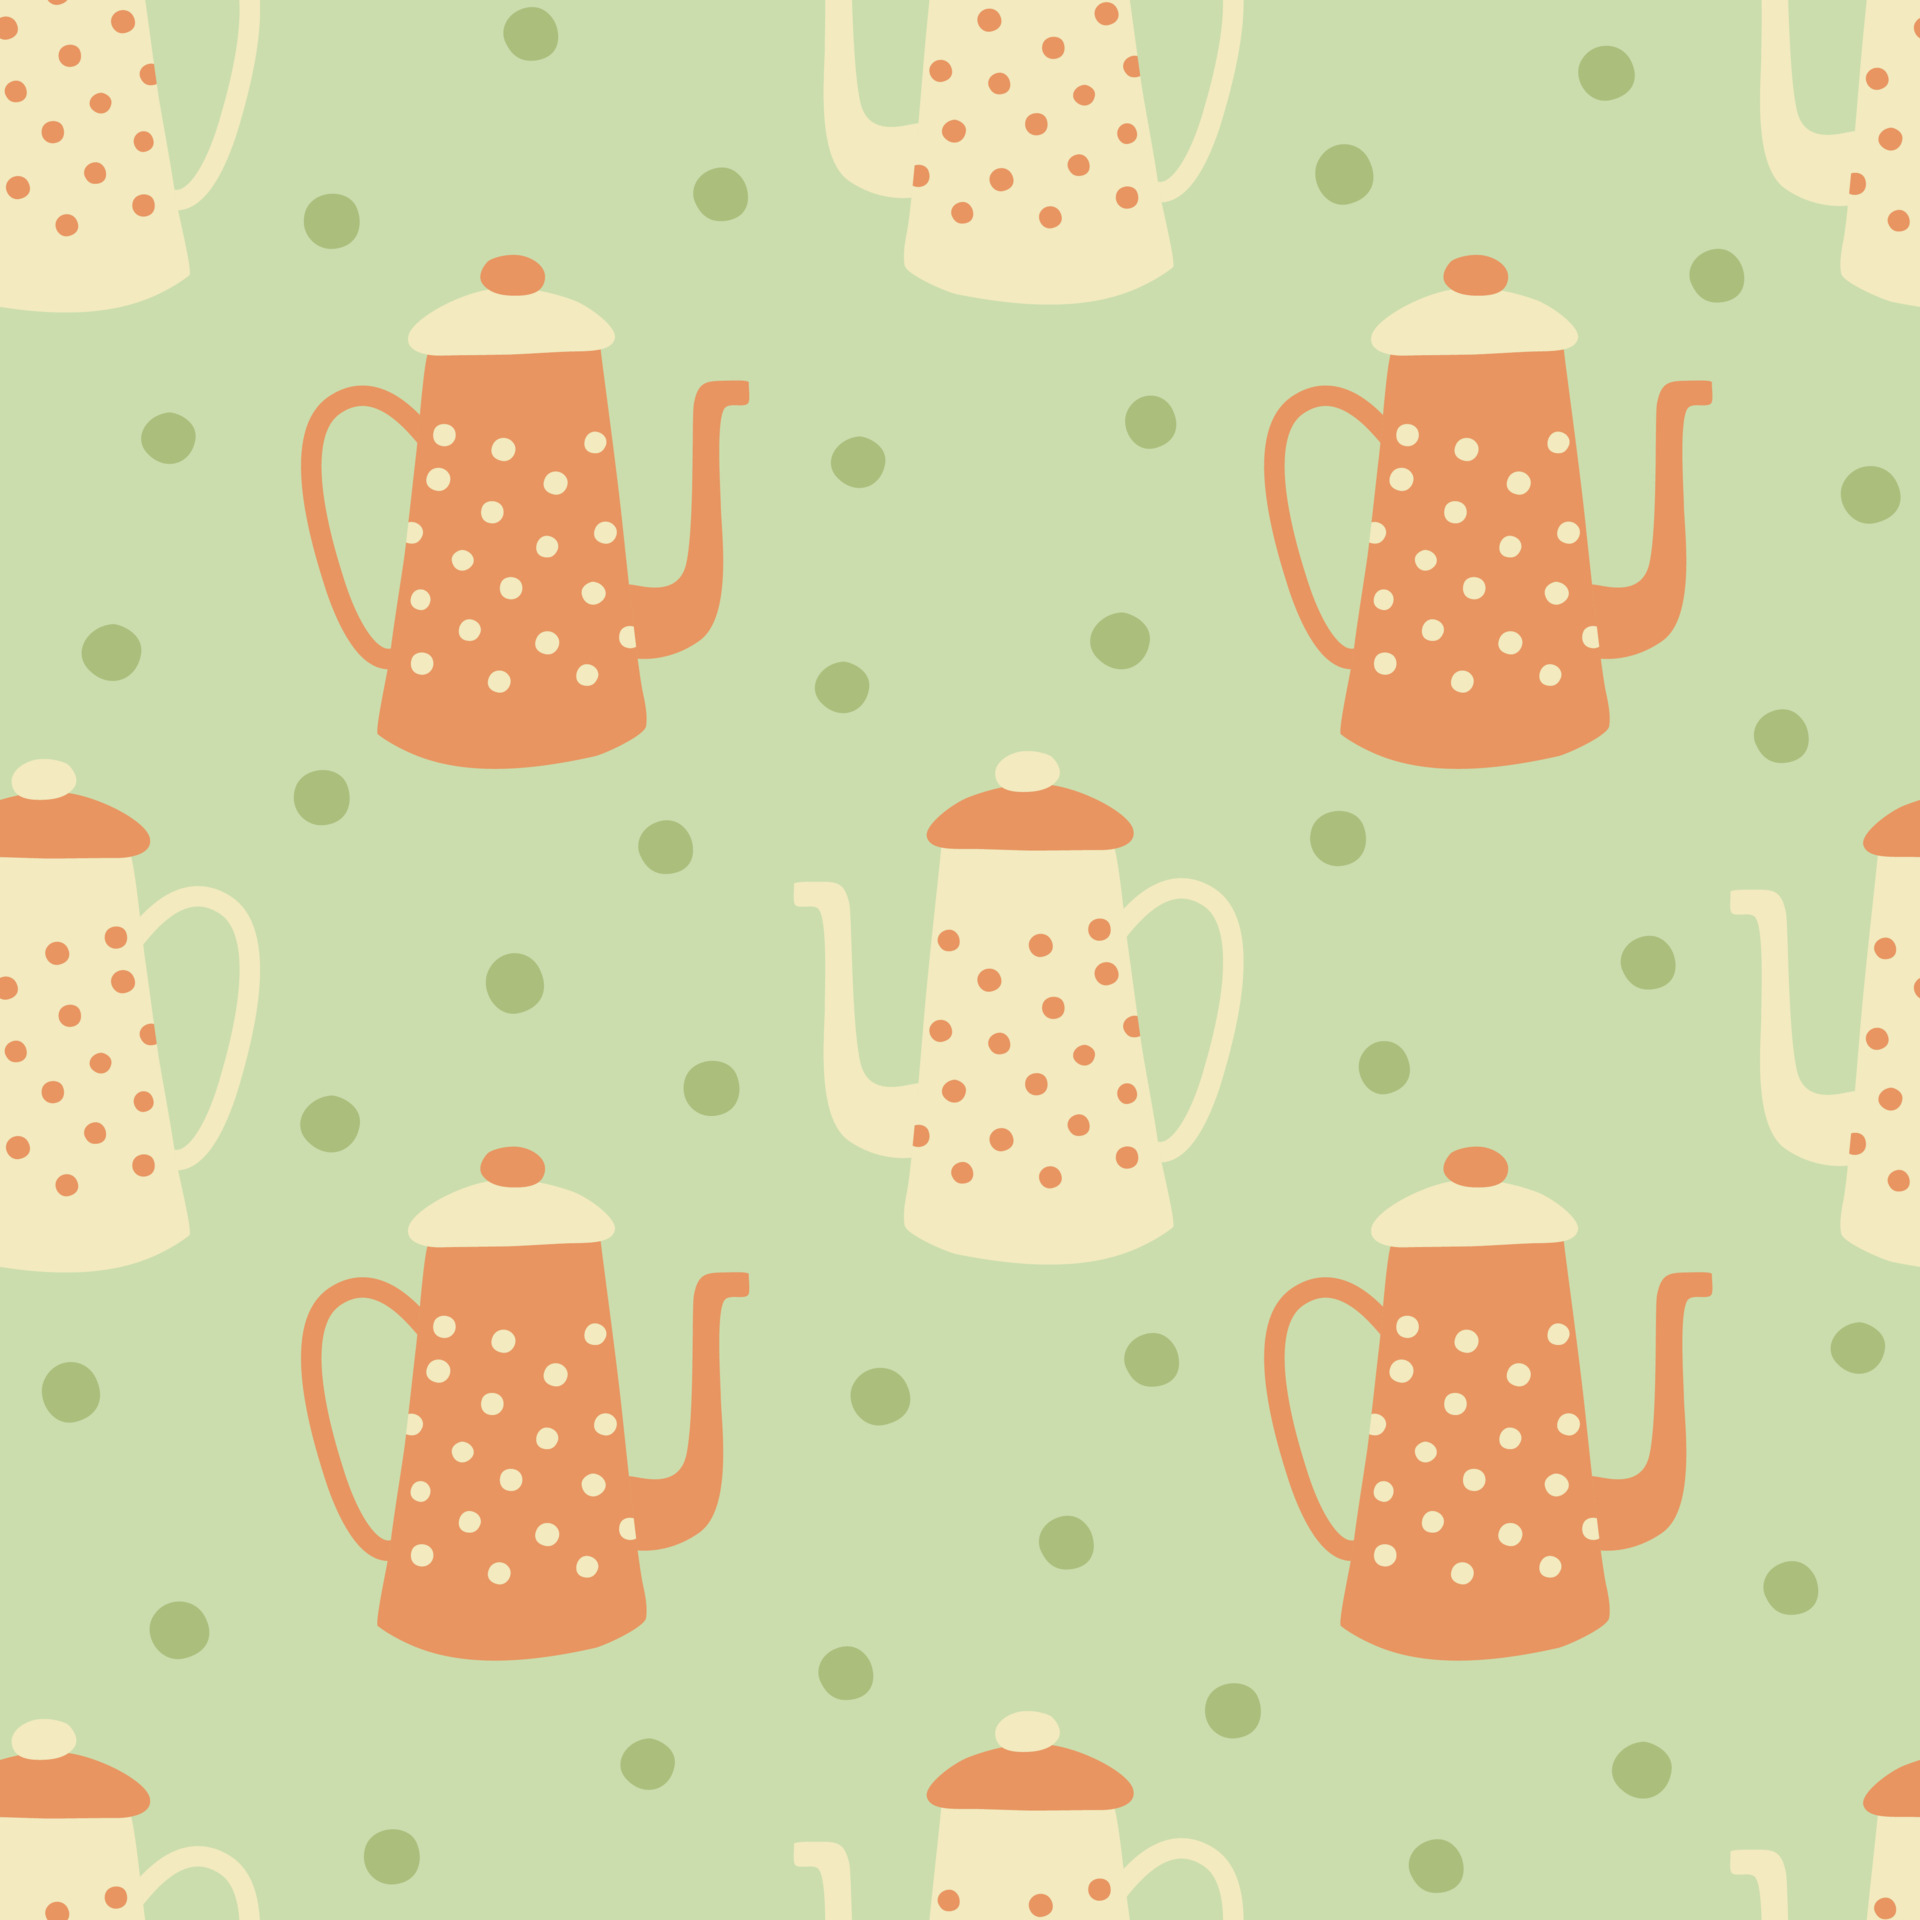 1920x1920 Teapot and polka dot seamless pattern. Ceramic kitchenware repeated vector illustration. Spring design for fabric, home textile, wallpaper 5587214 Vector Art